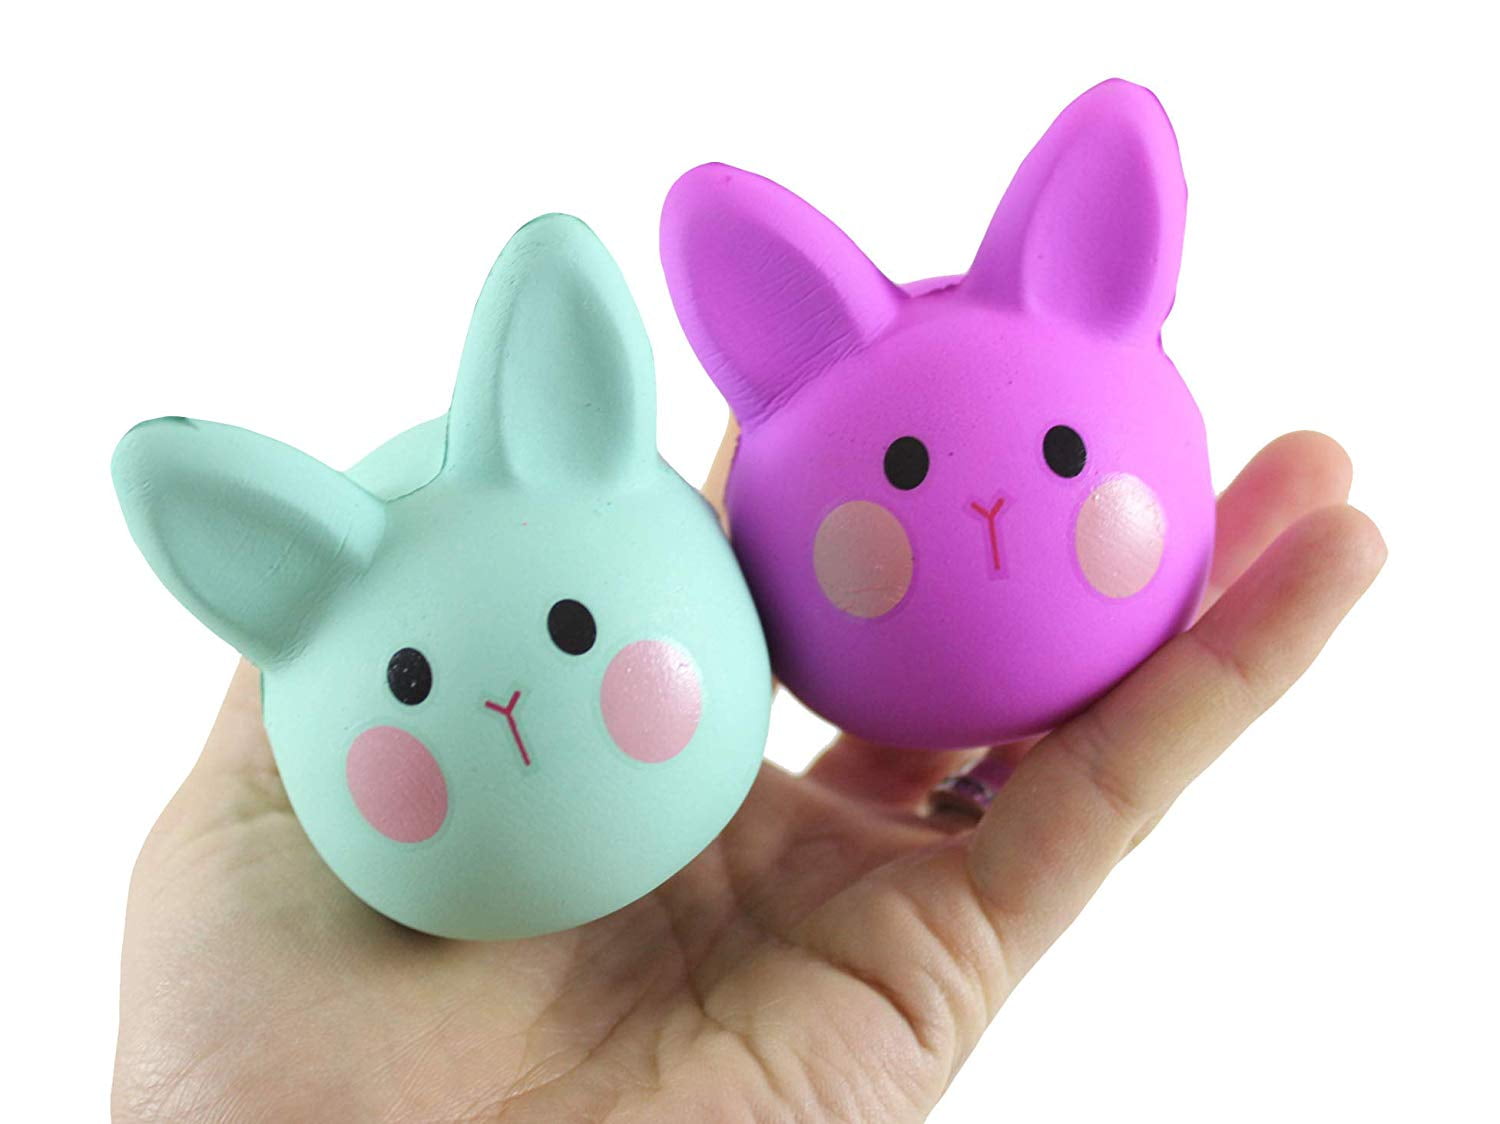 Mushimoto Bunny Eggie Soft Velvet Texture Squishy 6 Eggs Colorful Stress Relief 